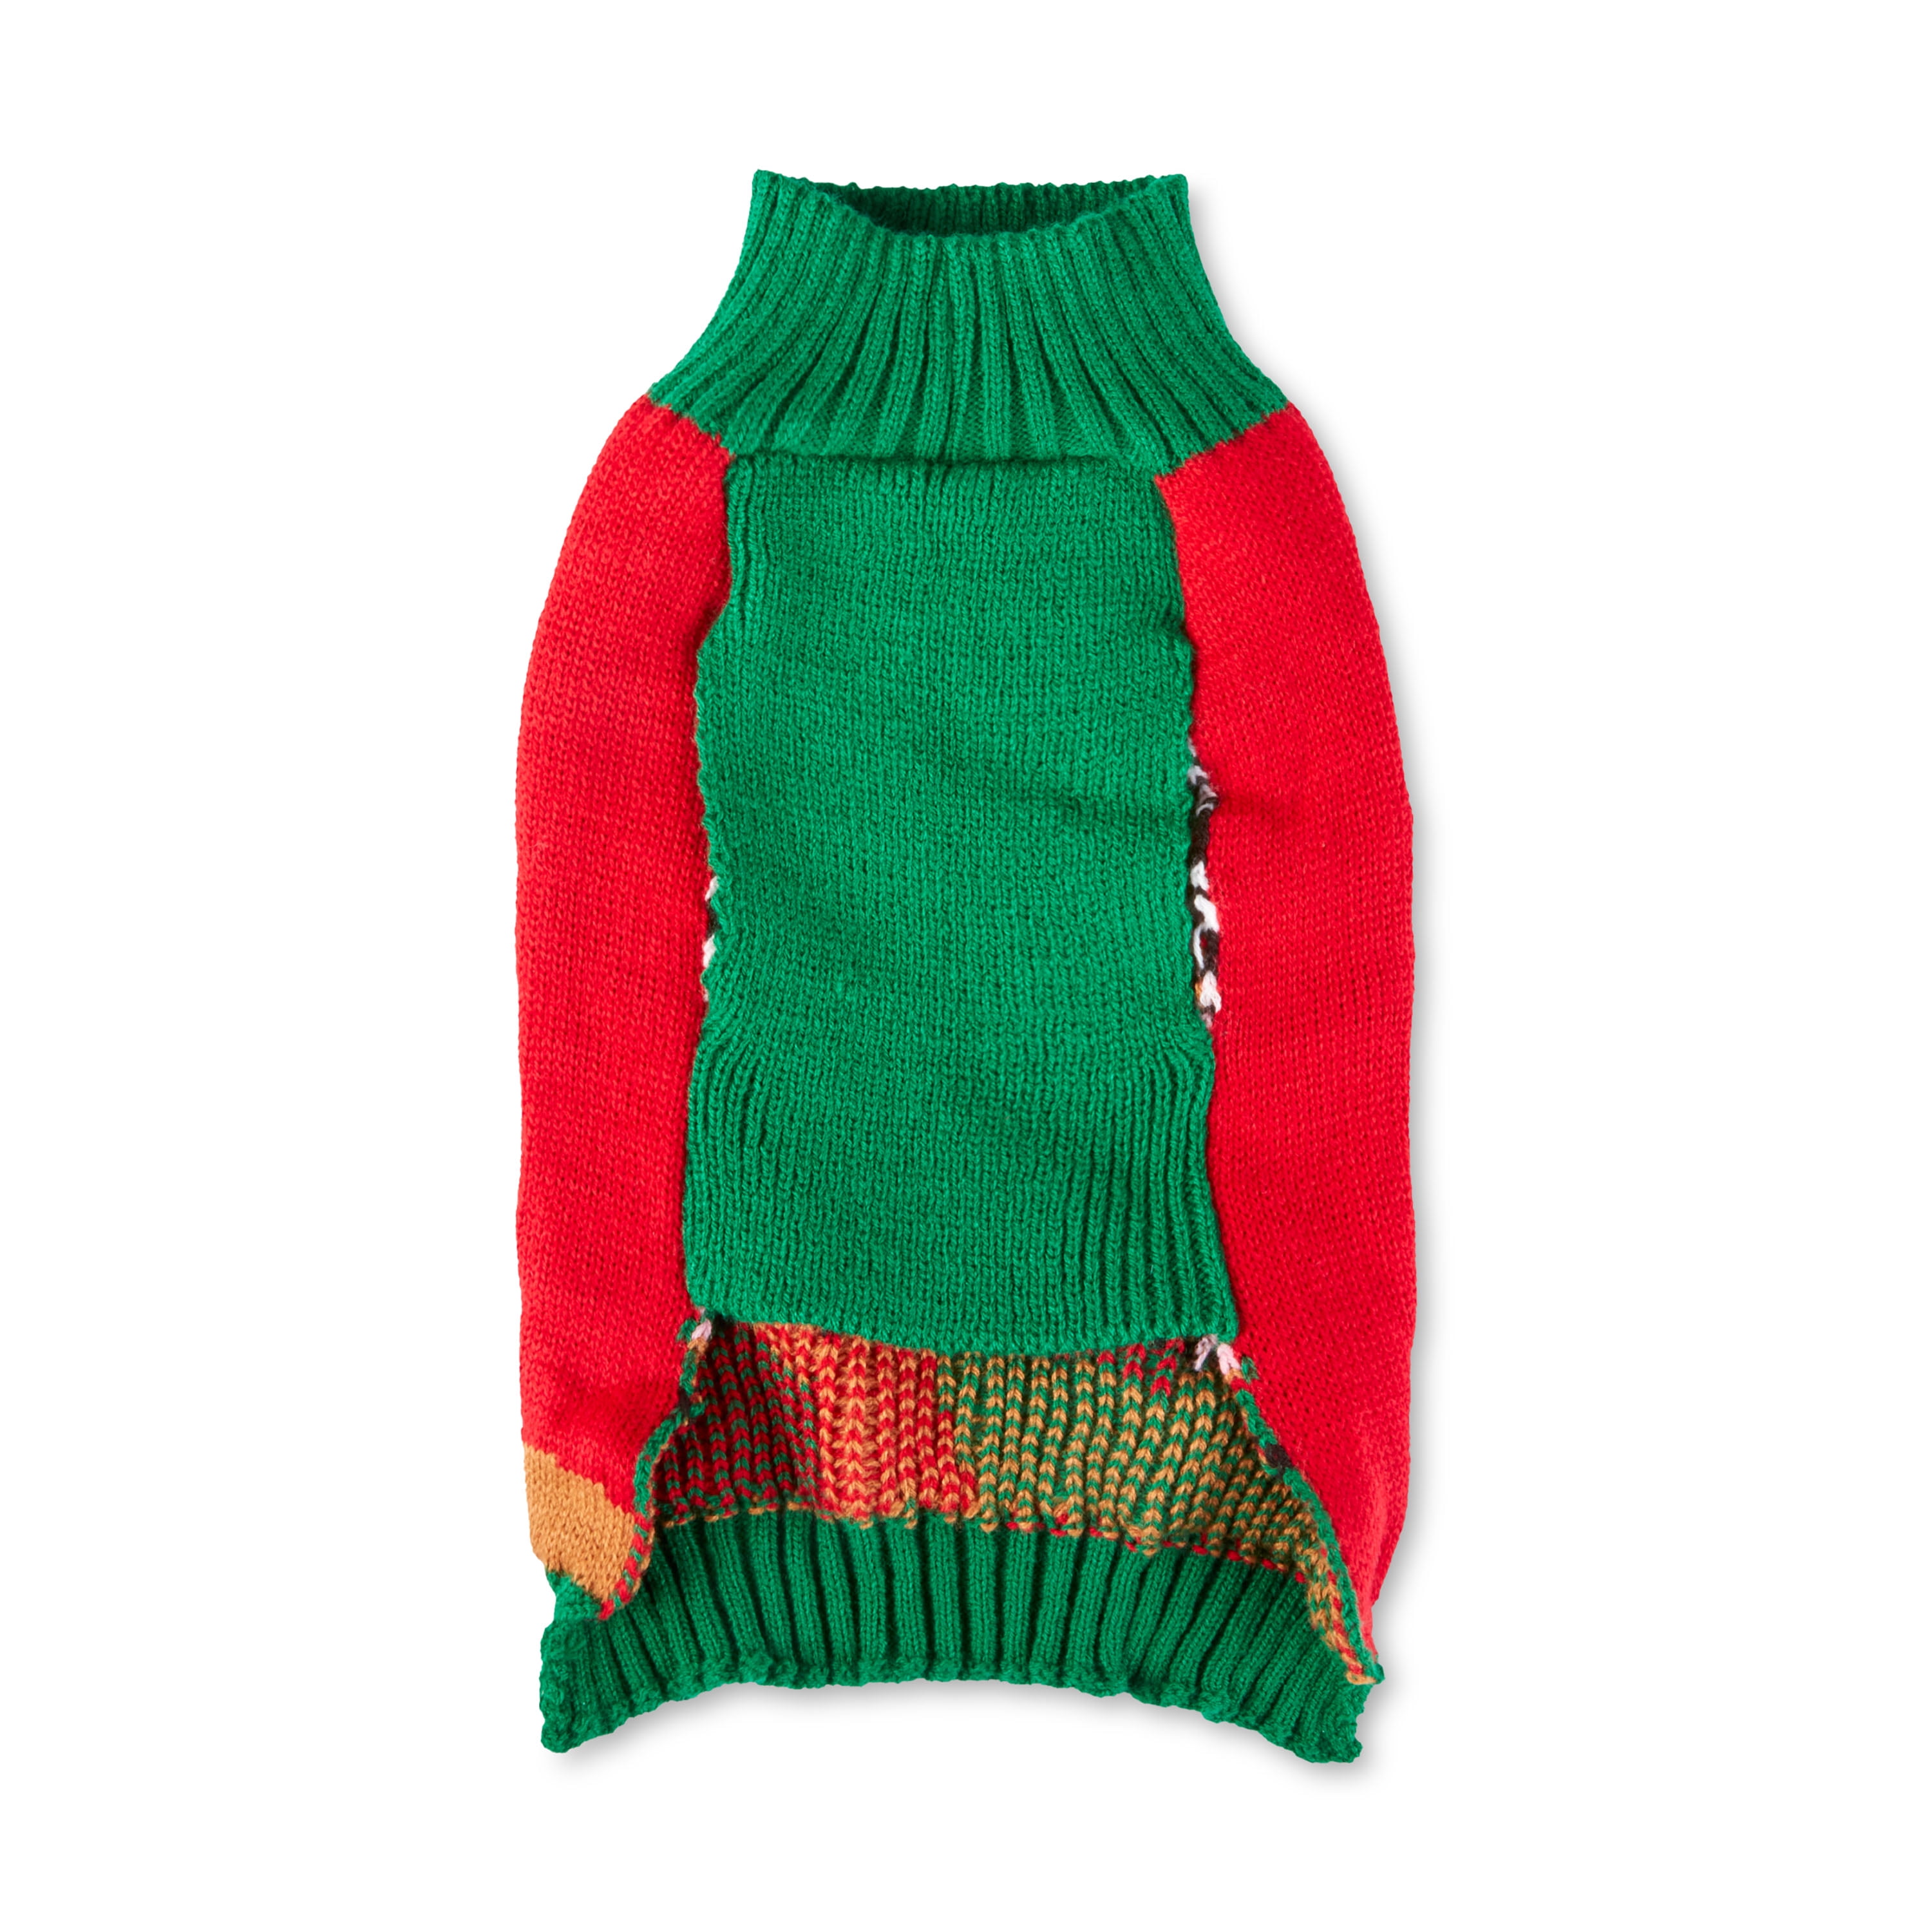 Pet Christmas Present Sweater | Adult | Unisex | Brown/Green/Red | XL | Fun Costumes